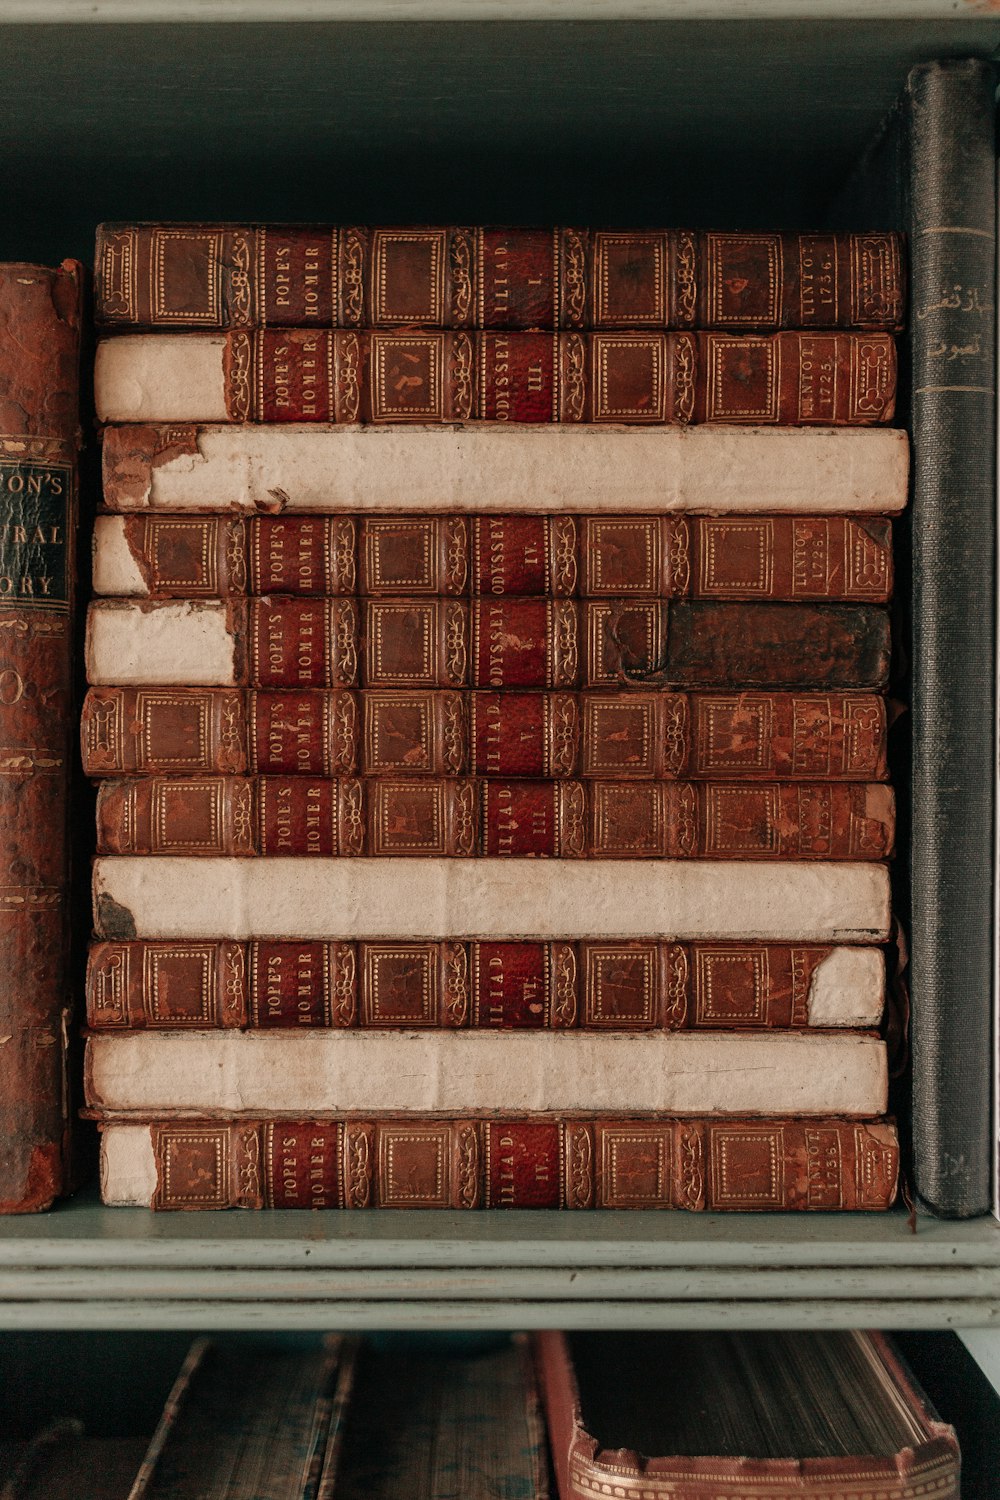 brown and white books on shelf